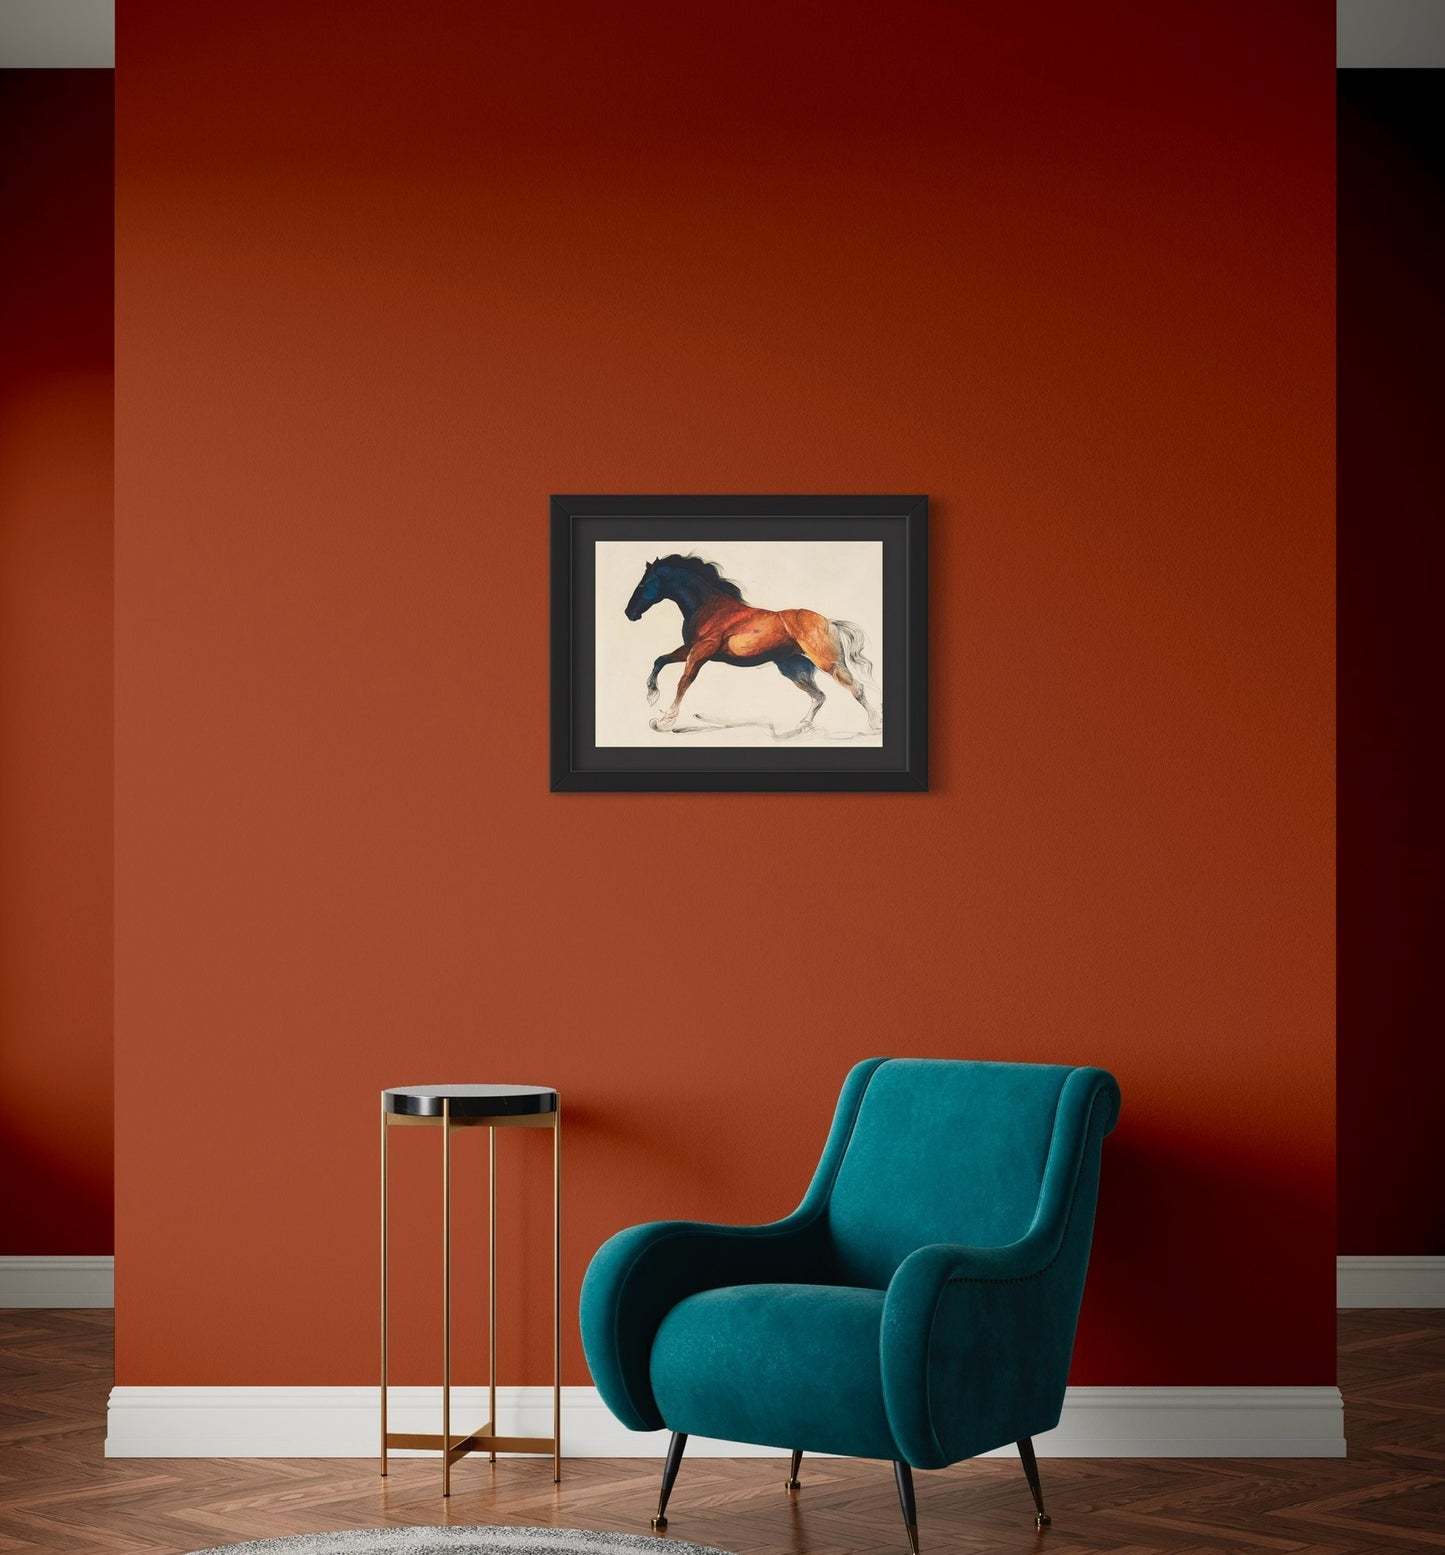 Captivating Equine Energy - Handmade Painting of a Running Horse